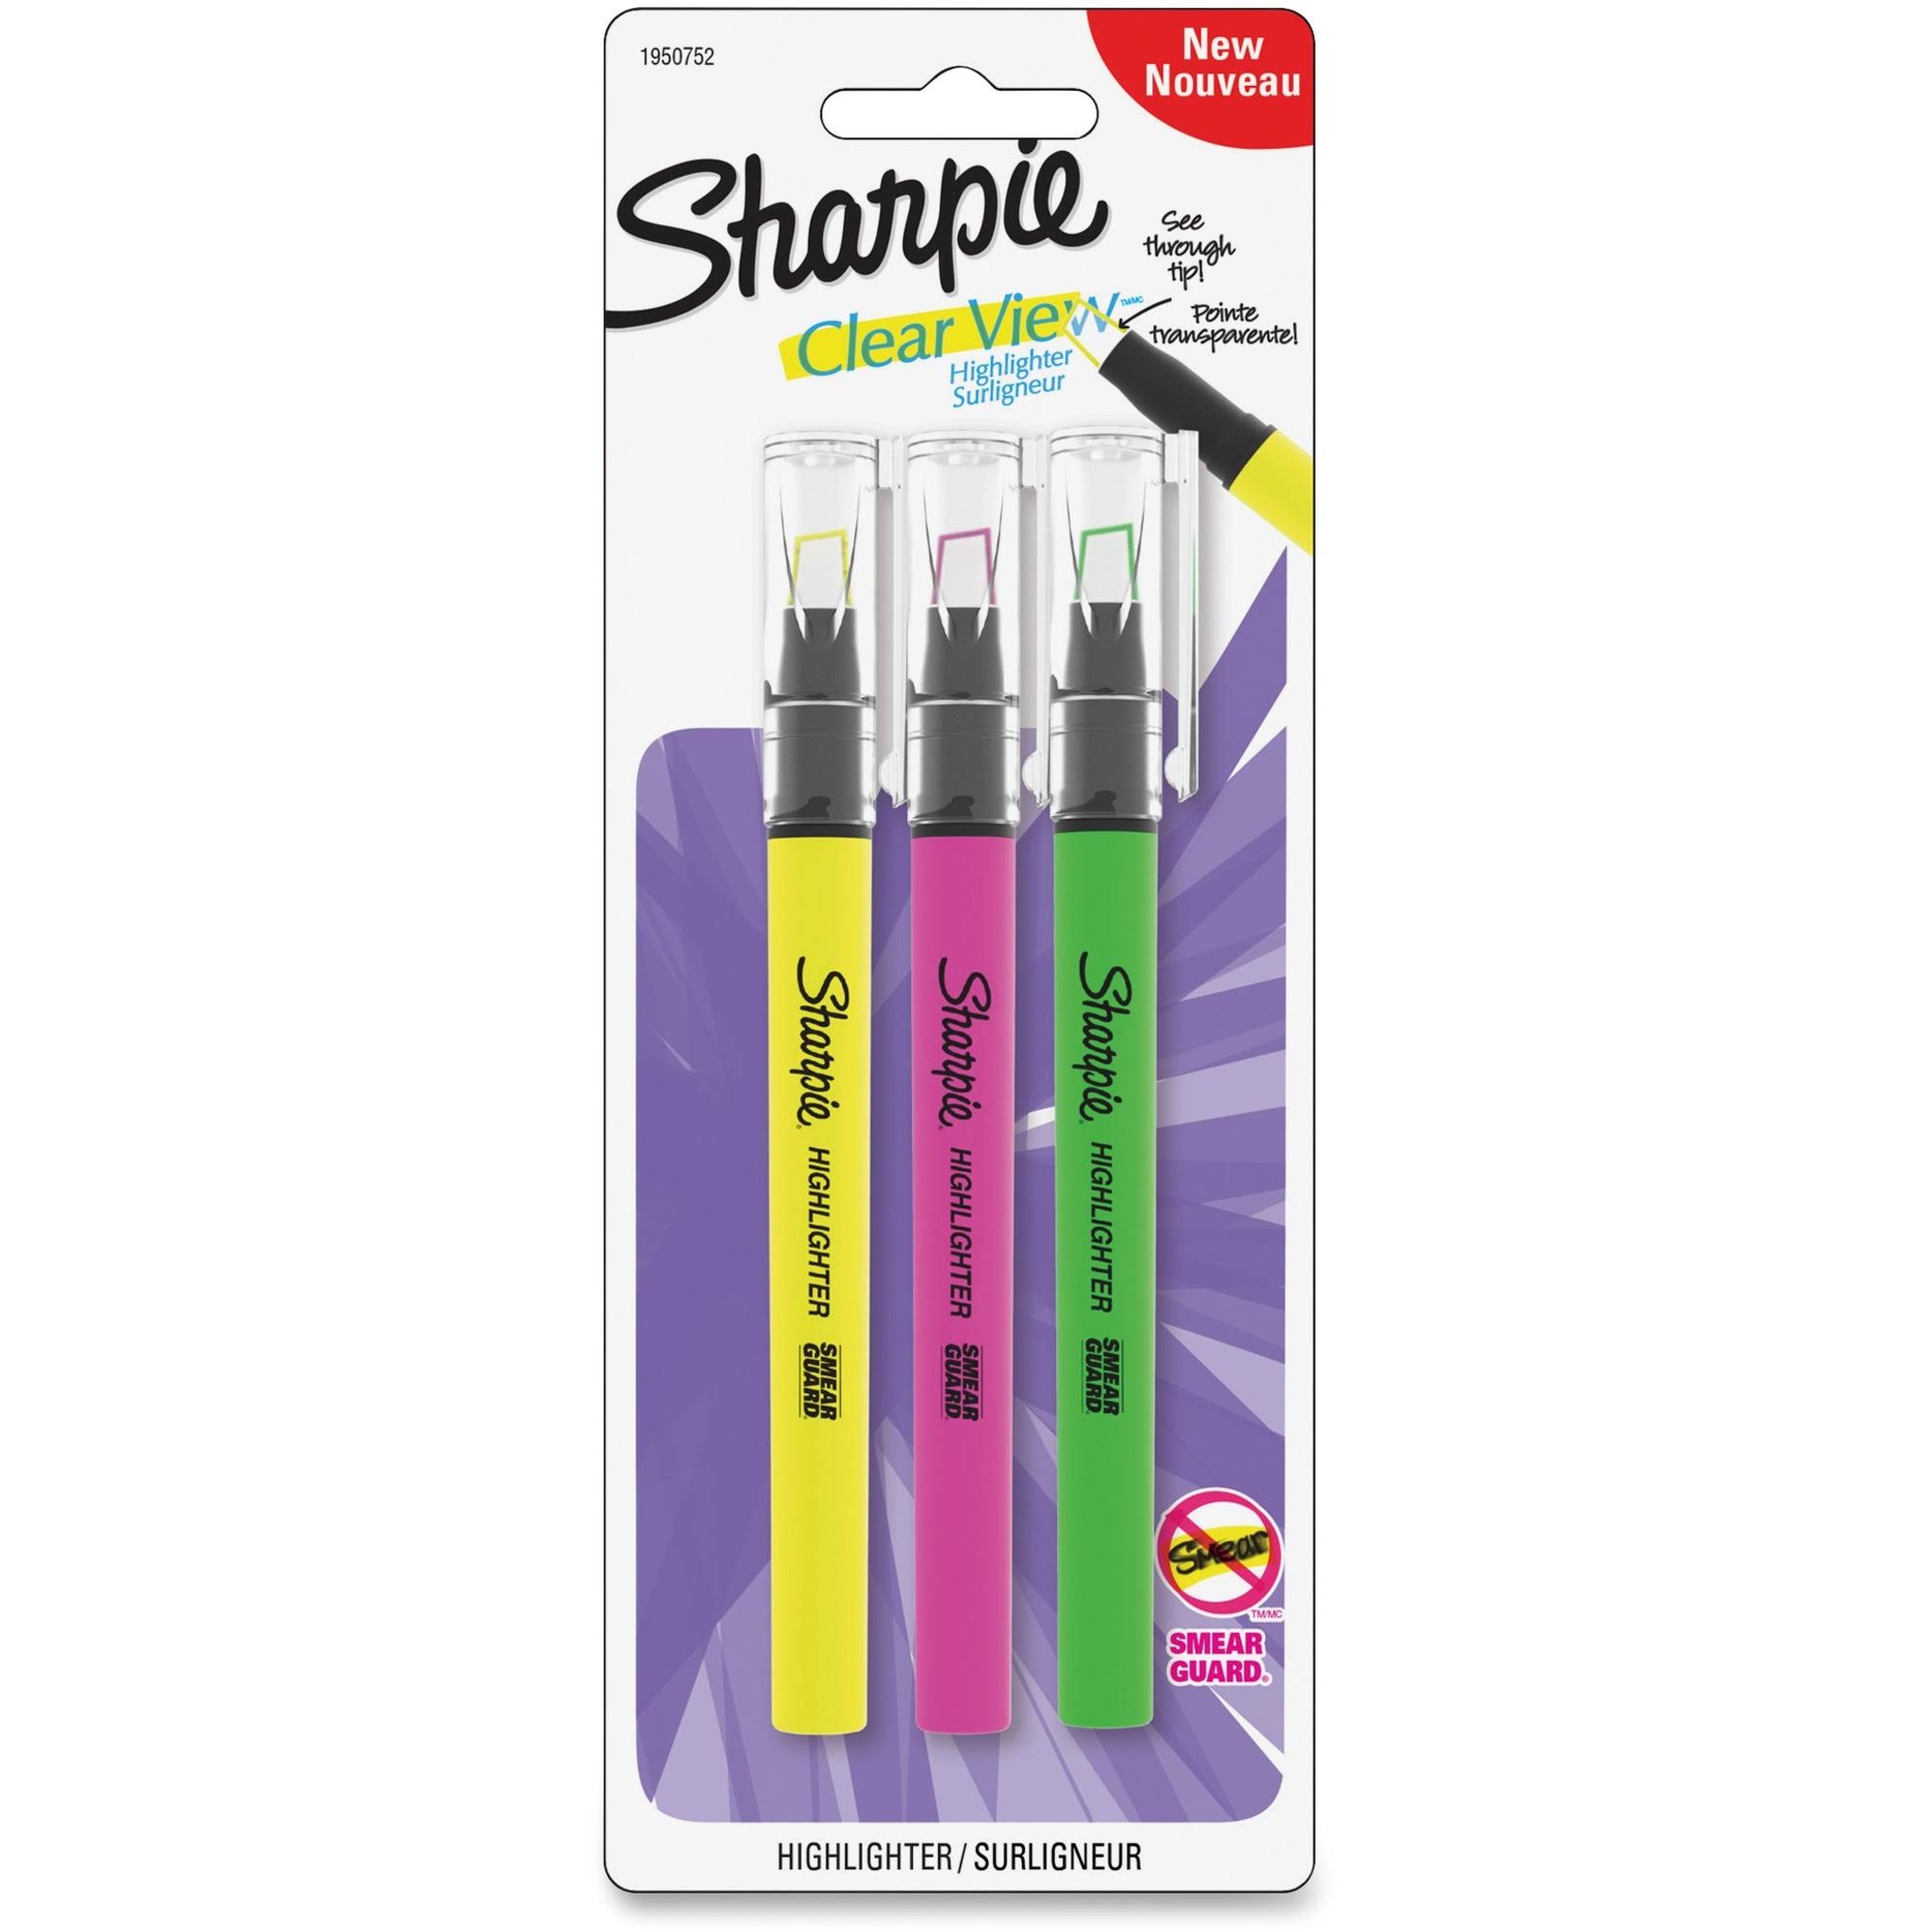 Sharpie Clear View Highlighters - 3pcs